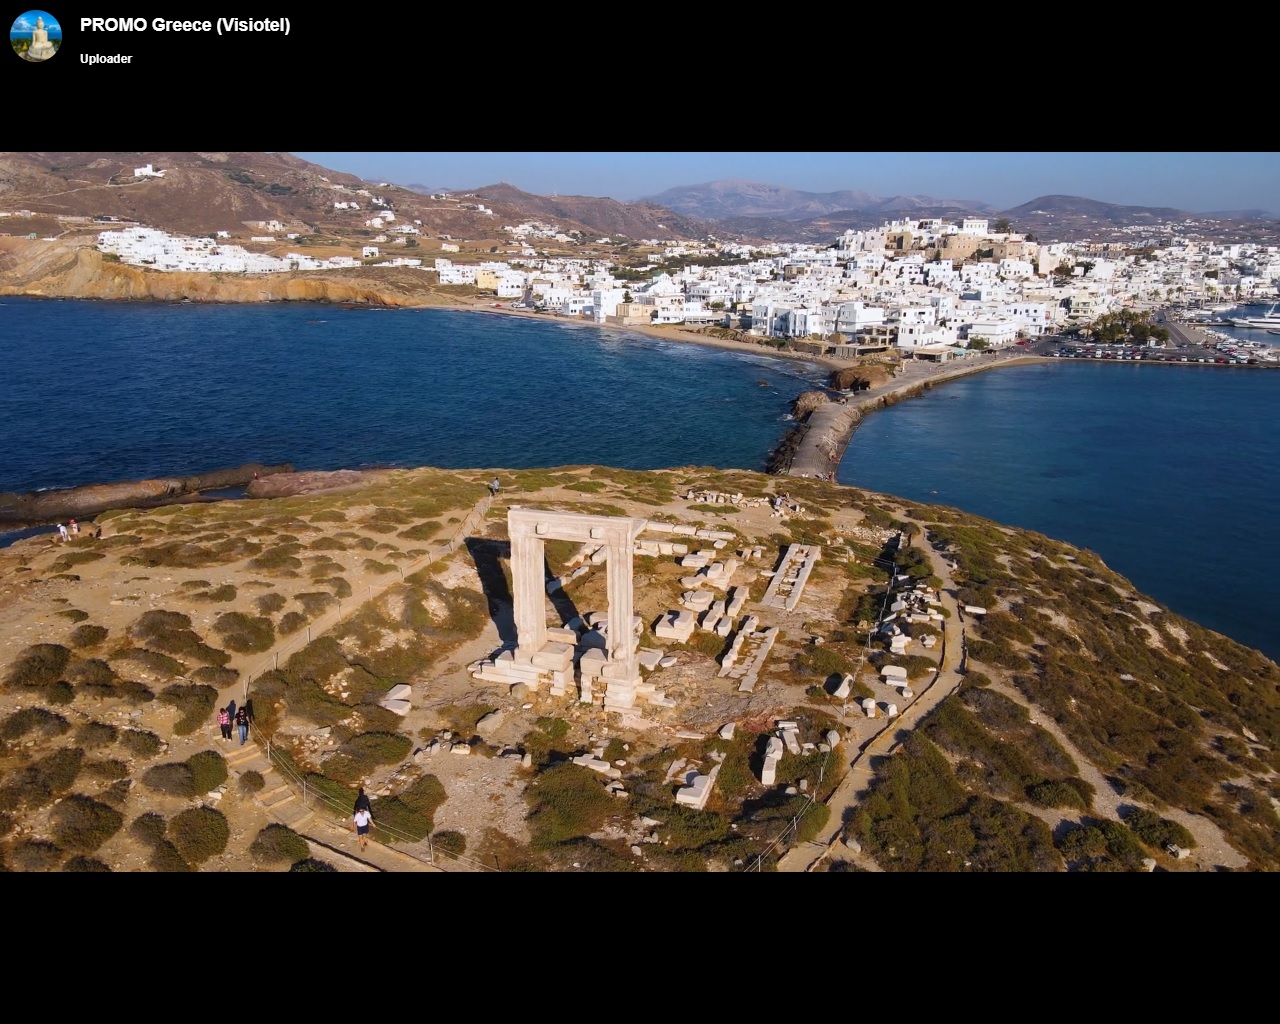 International distinctions of Naxos and promotion initiatives by the Municipality